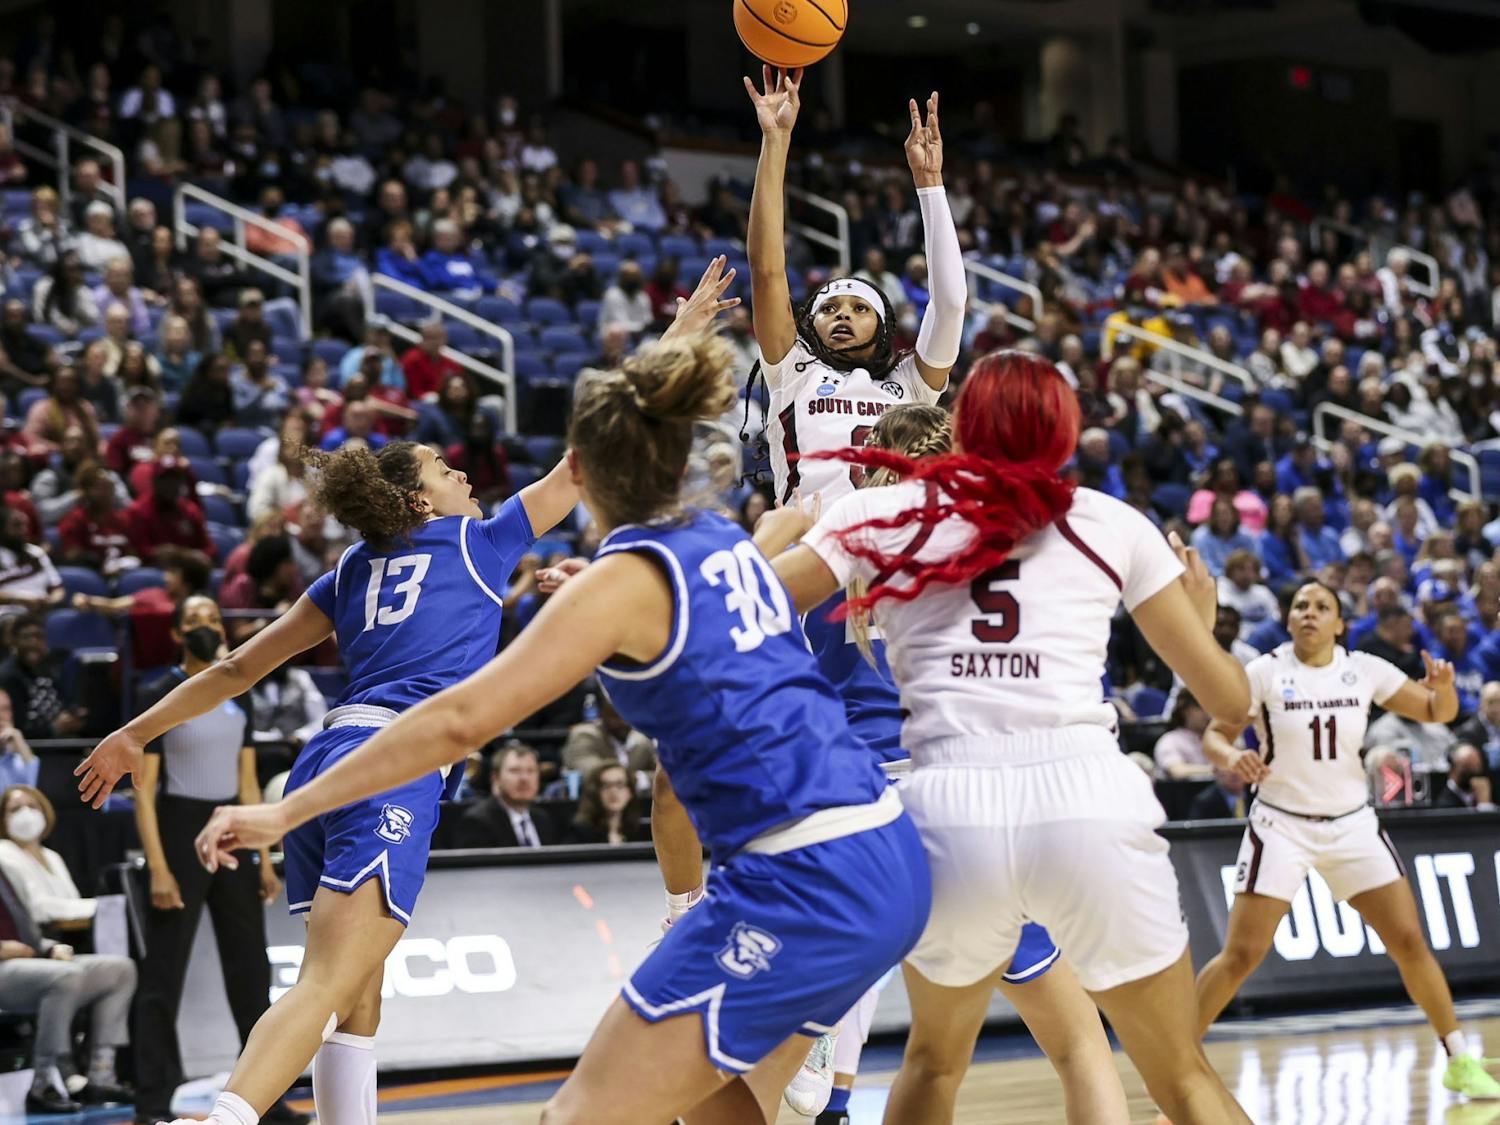 The South Carolina women's basketball team beat Creighton 80-50 in the Elite Eight. The win propelled the team to the Final Four.&nbsp;